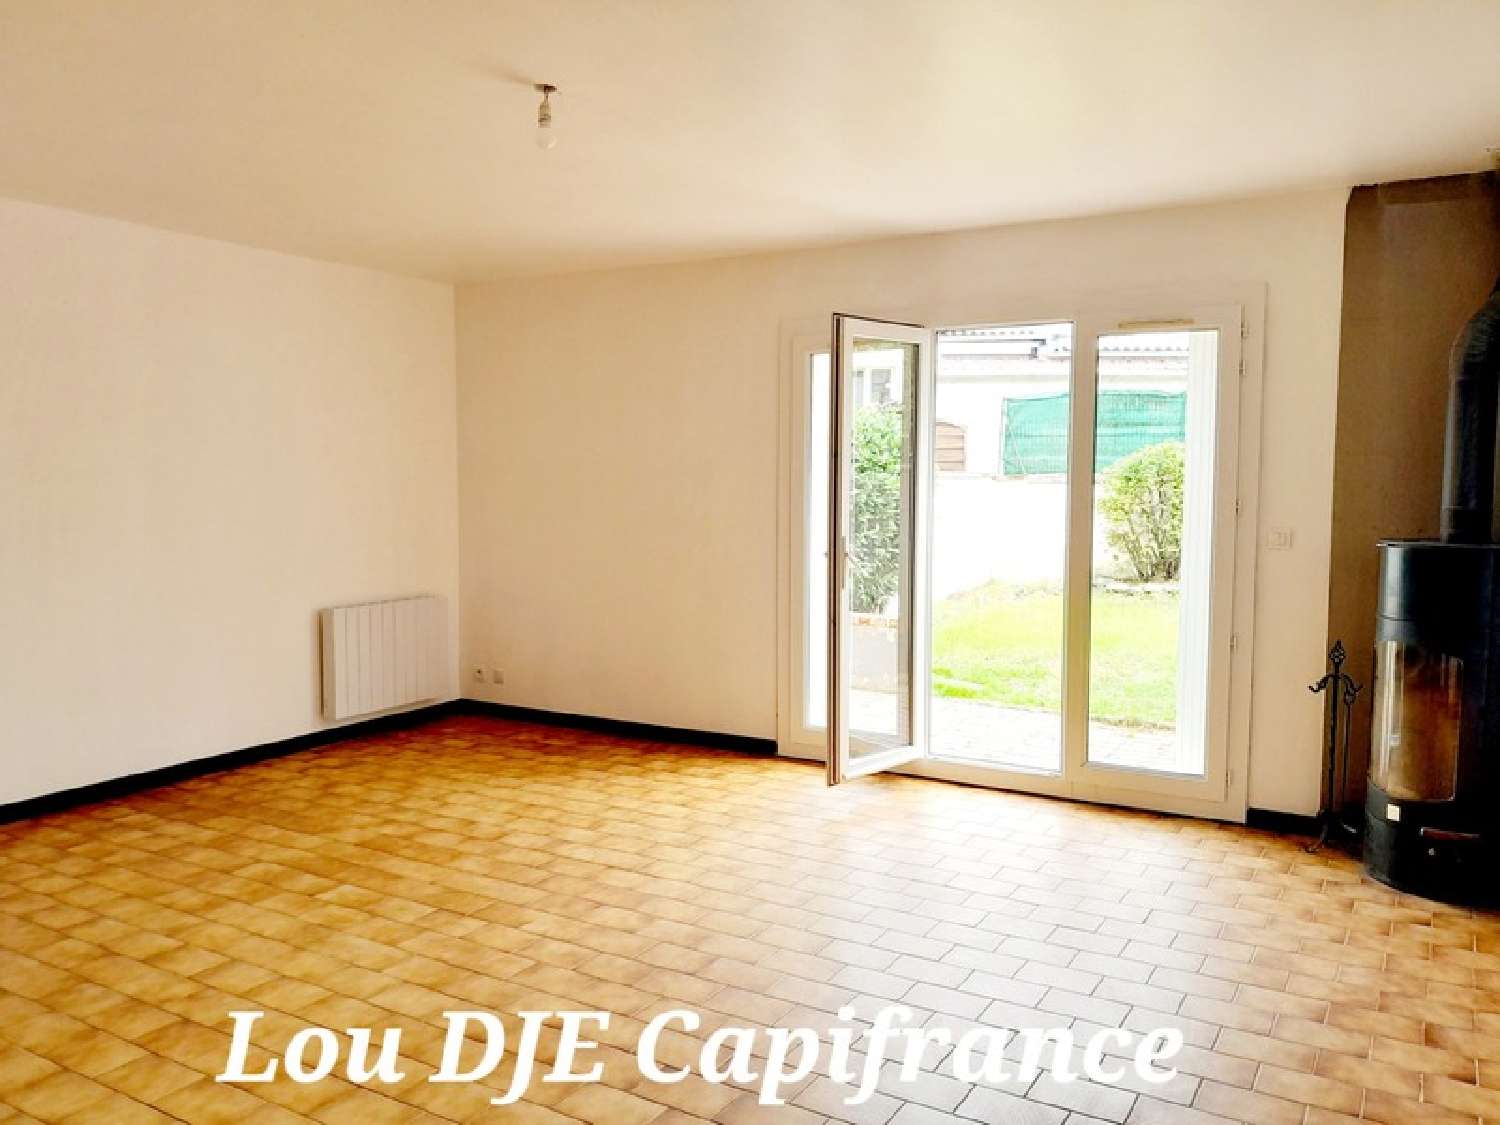  for sale house Chevilly Loiret 1